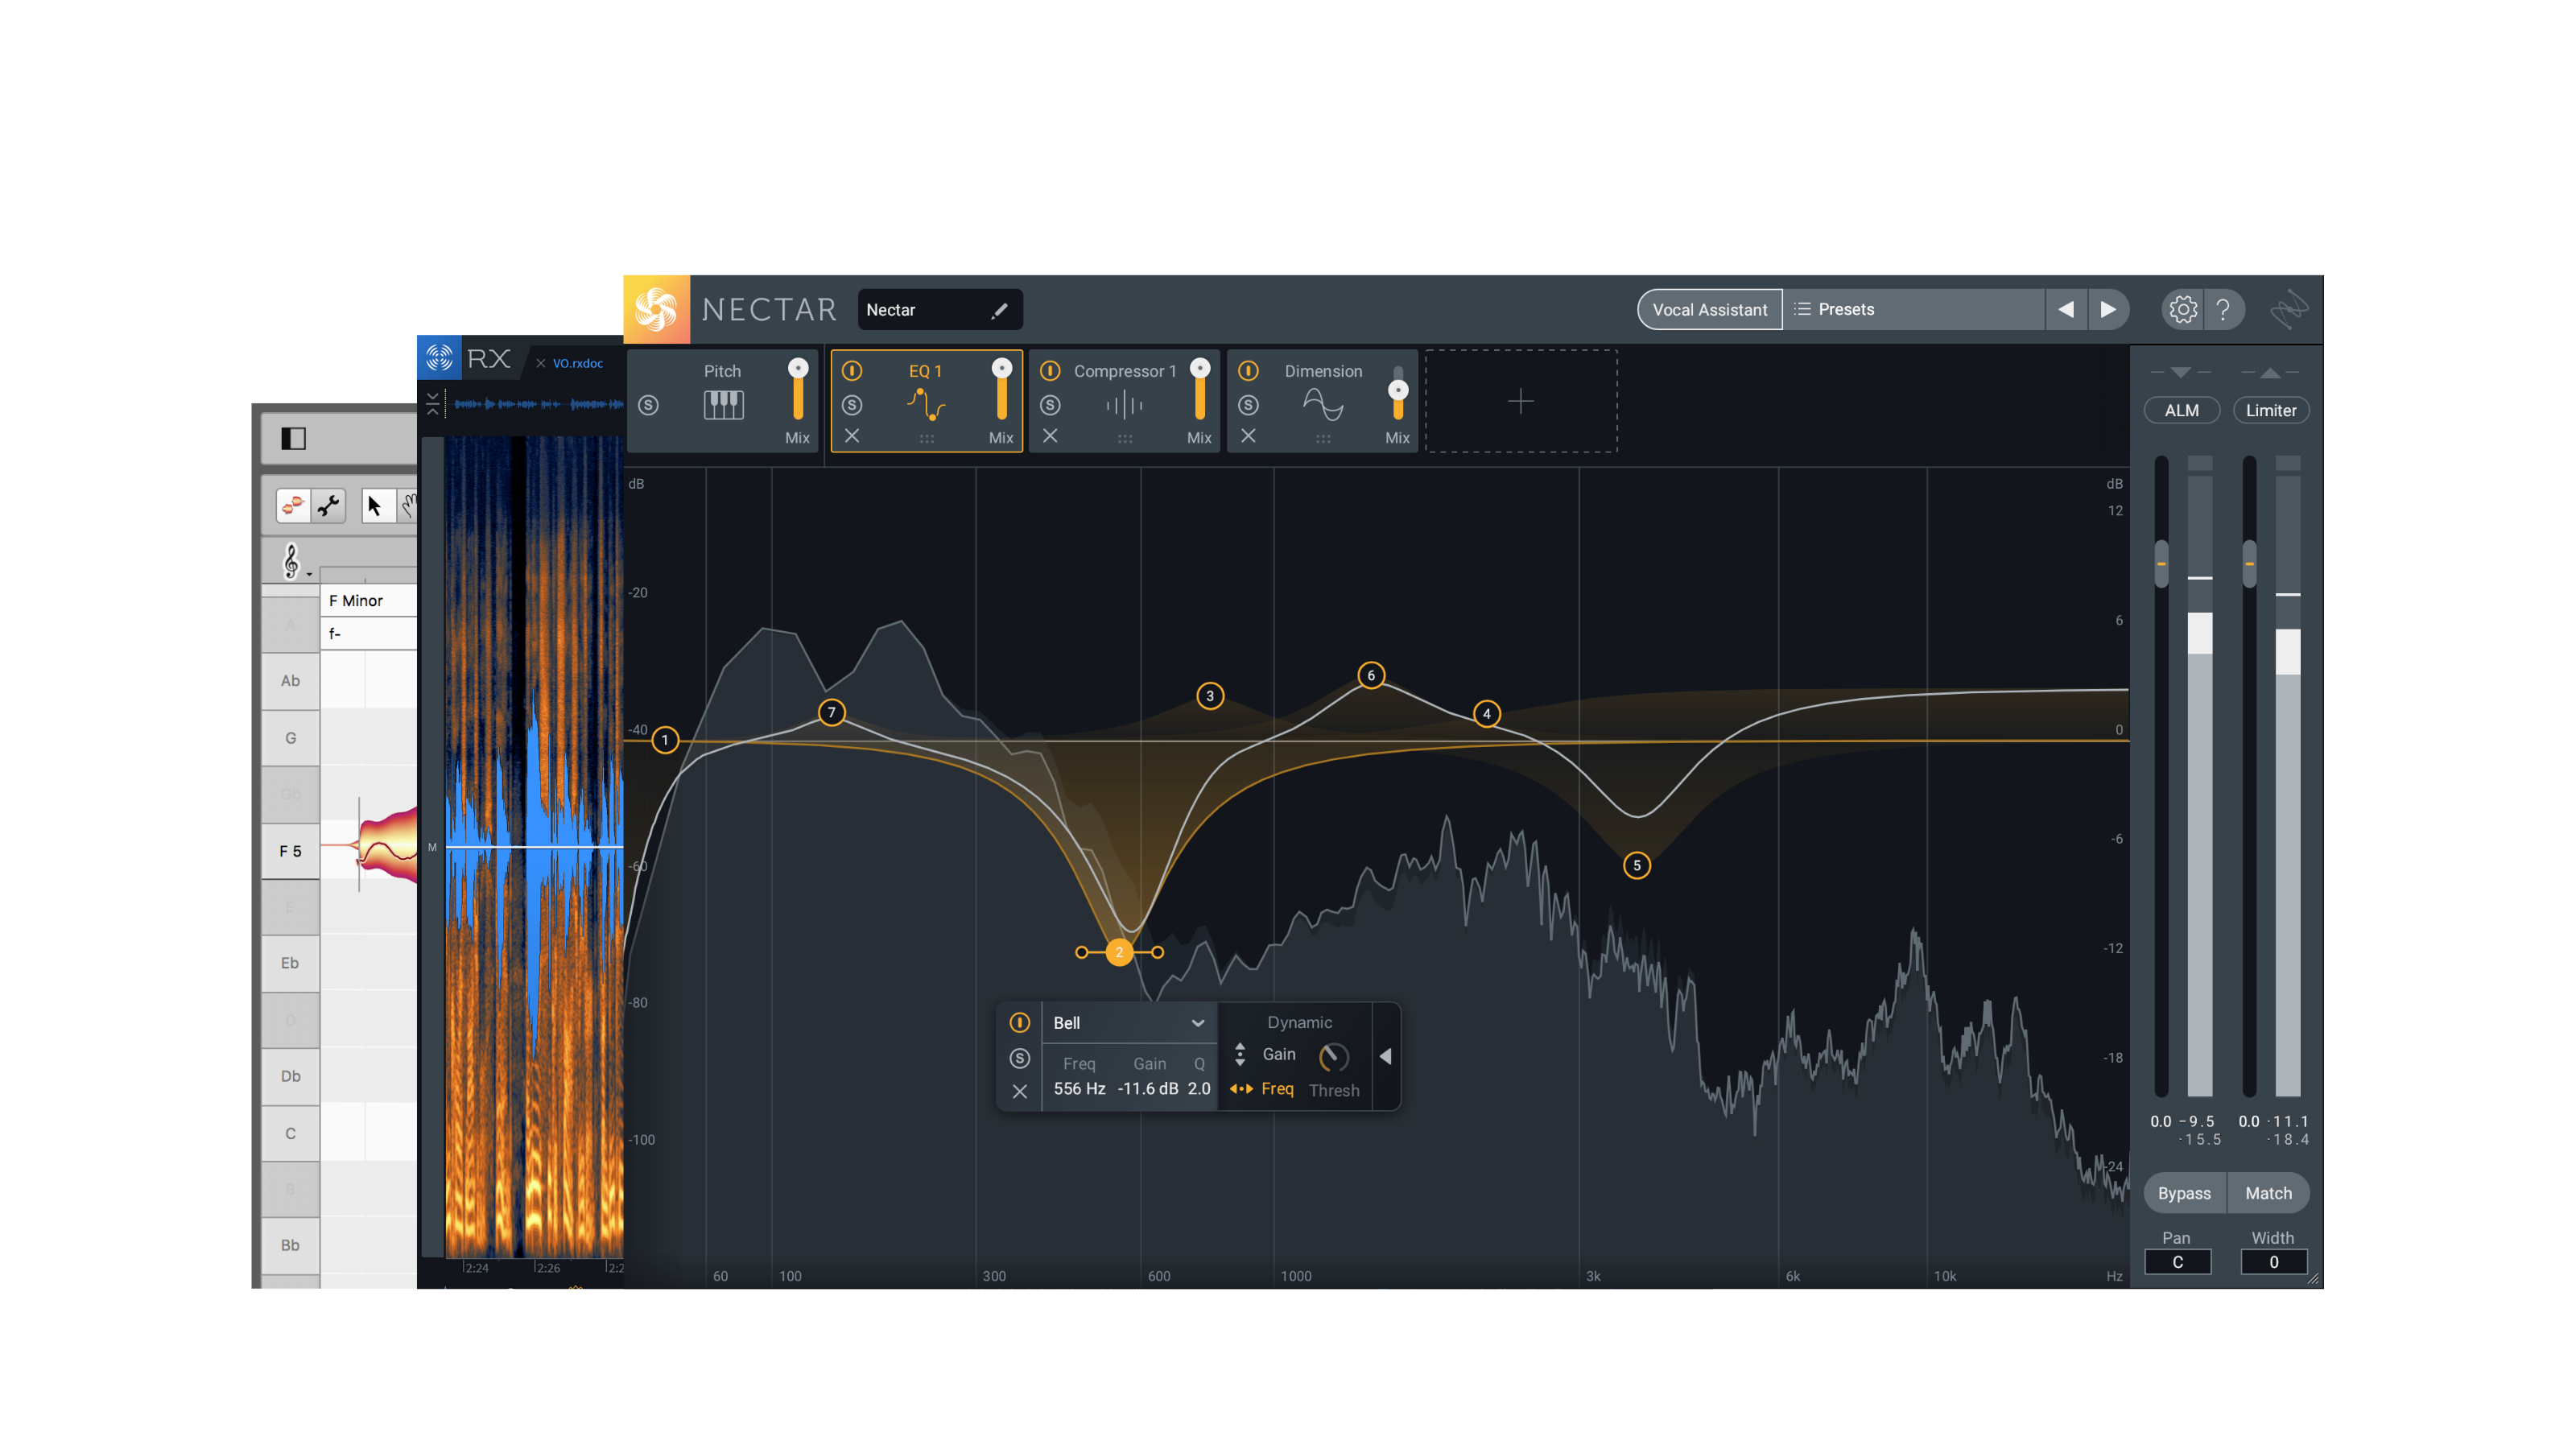 iZotope Home Studio Vocal Bundle Upgrade from RX Elements